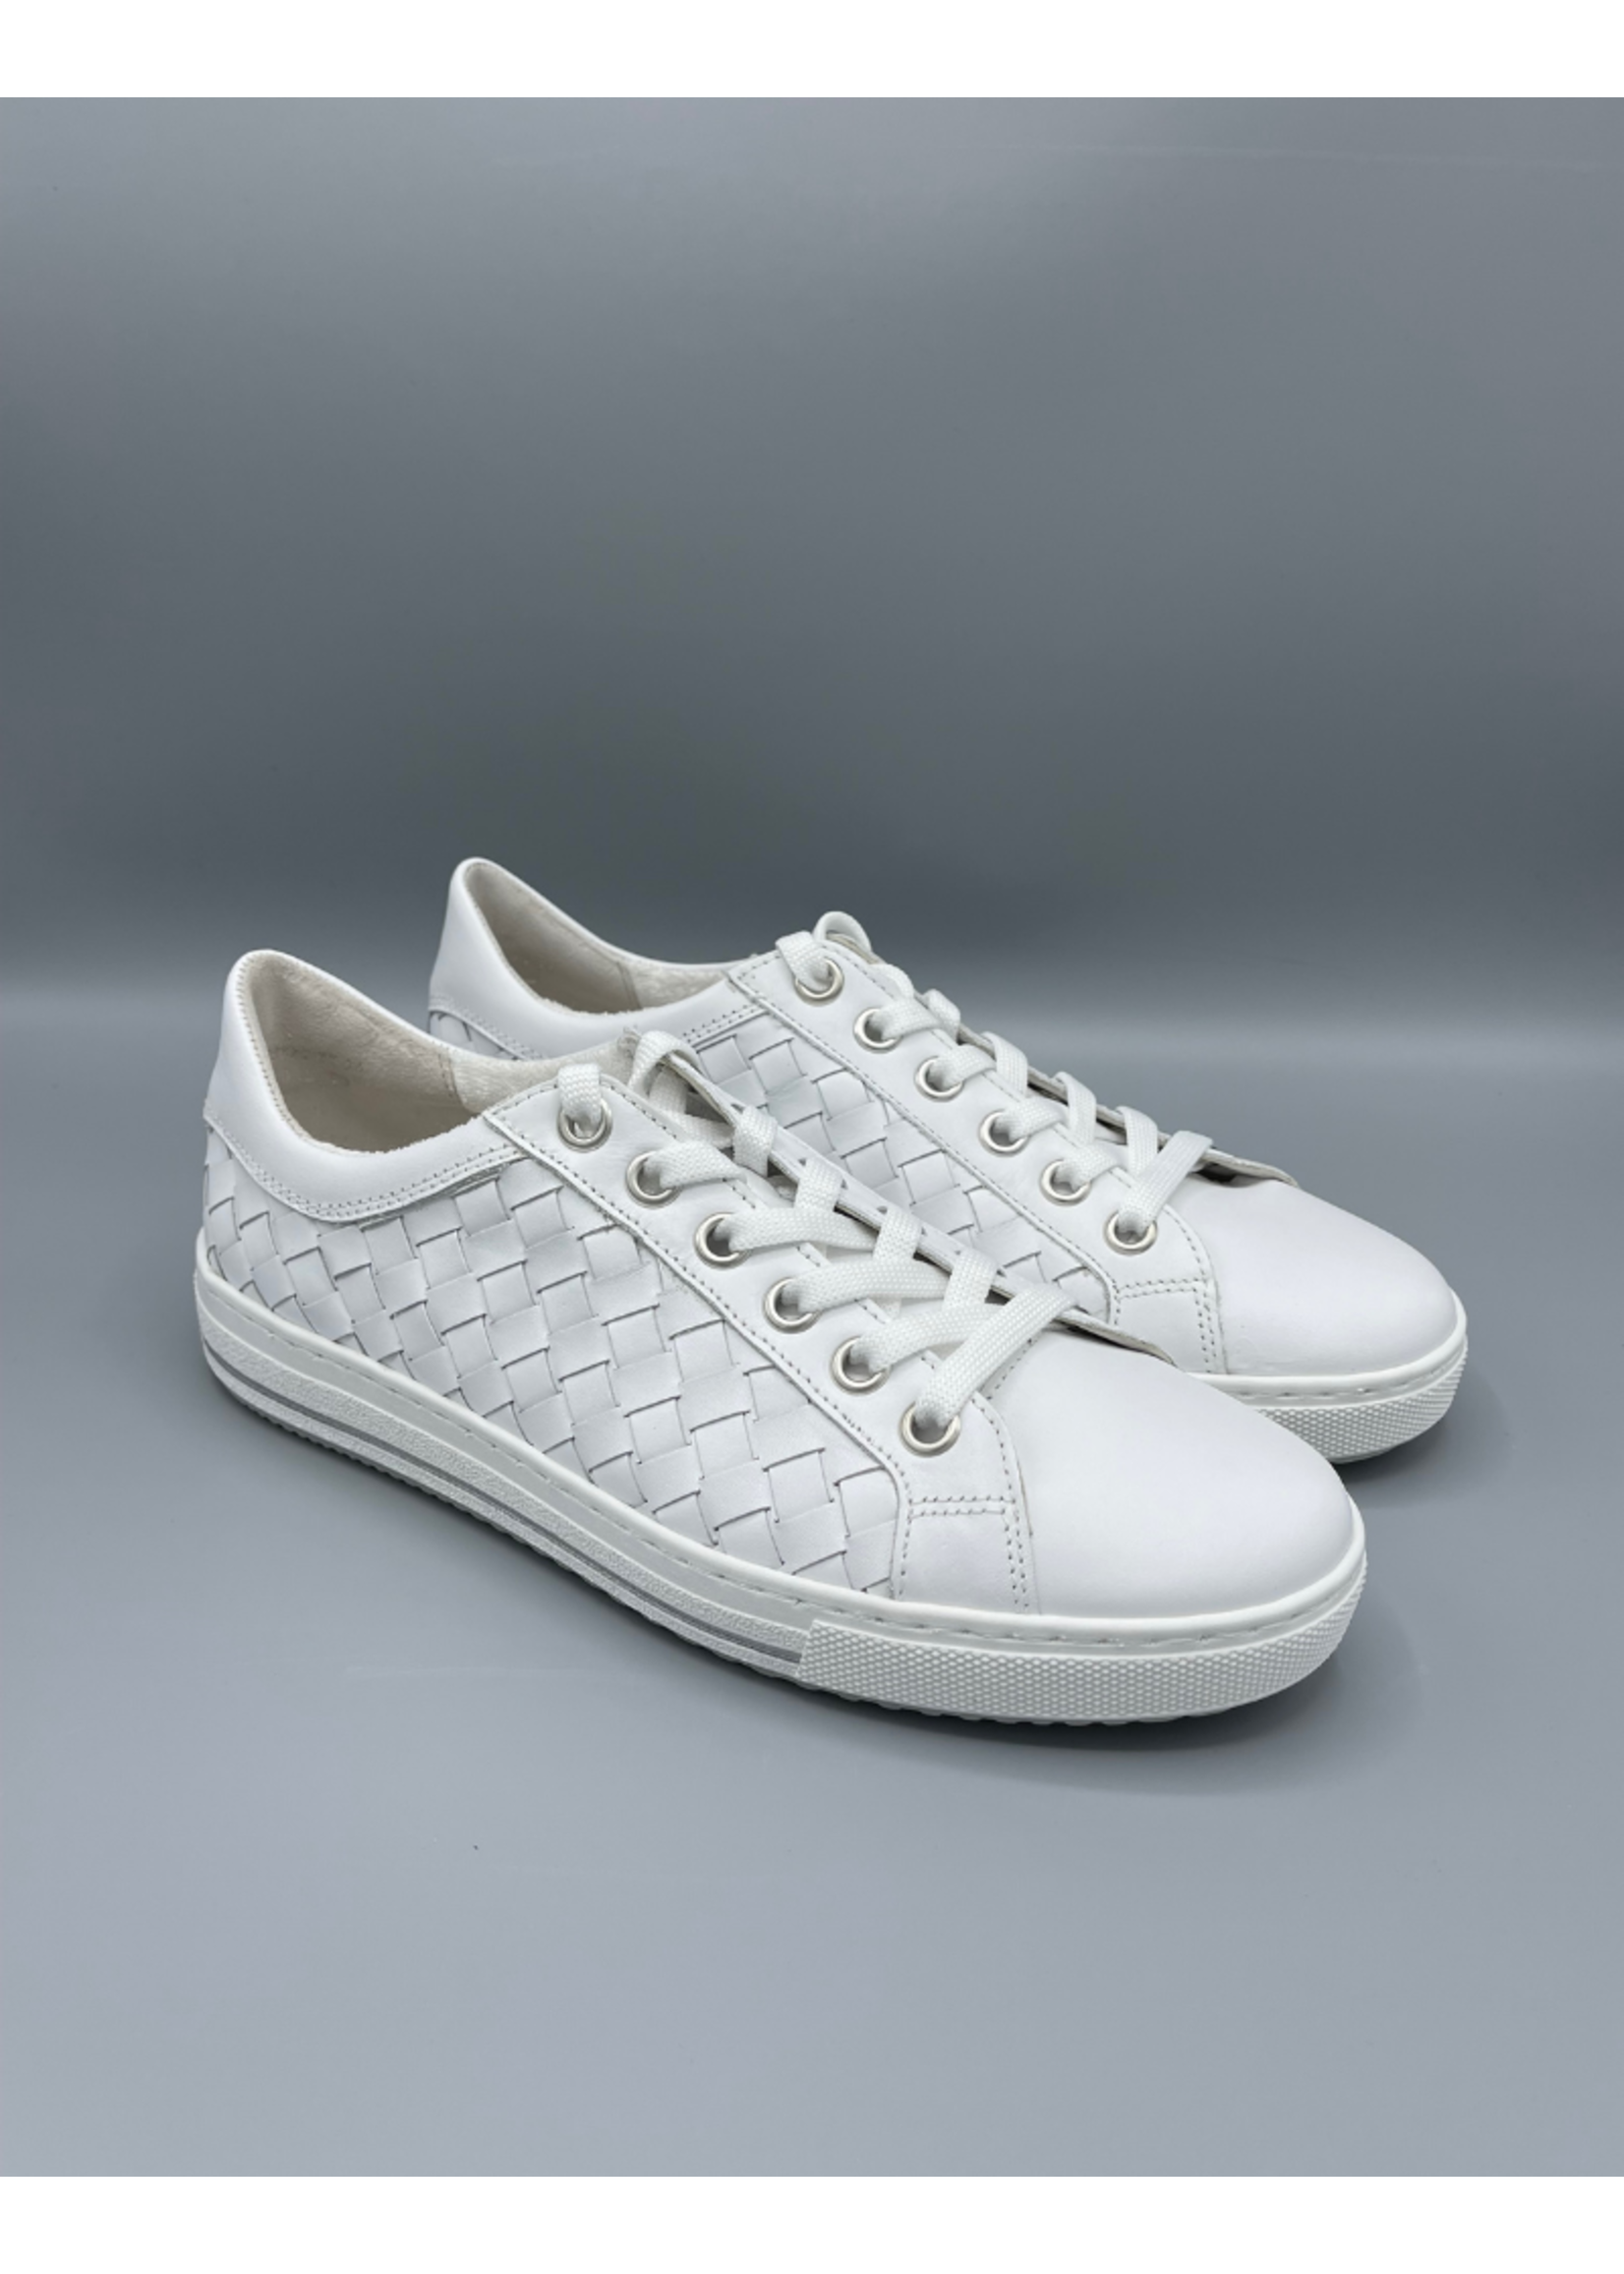 Woven Sneakers | Women's Casual Shoes - espy